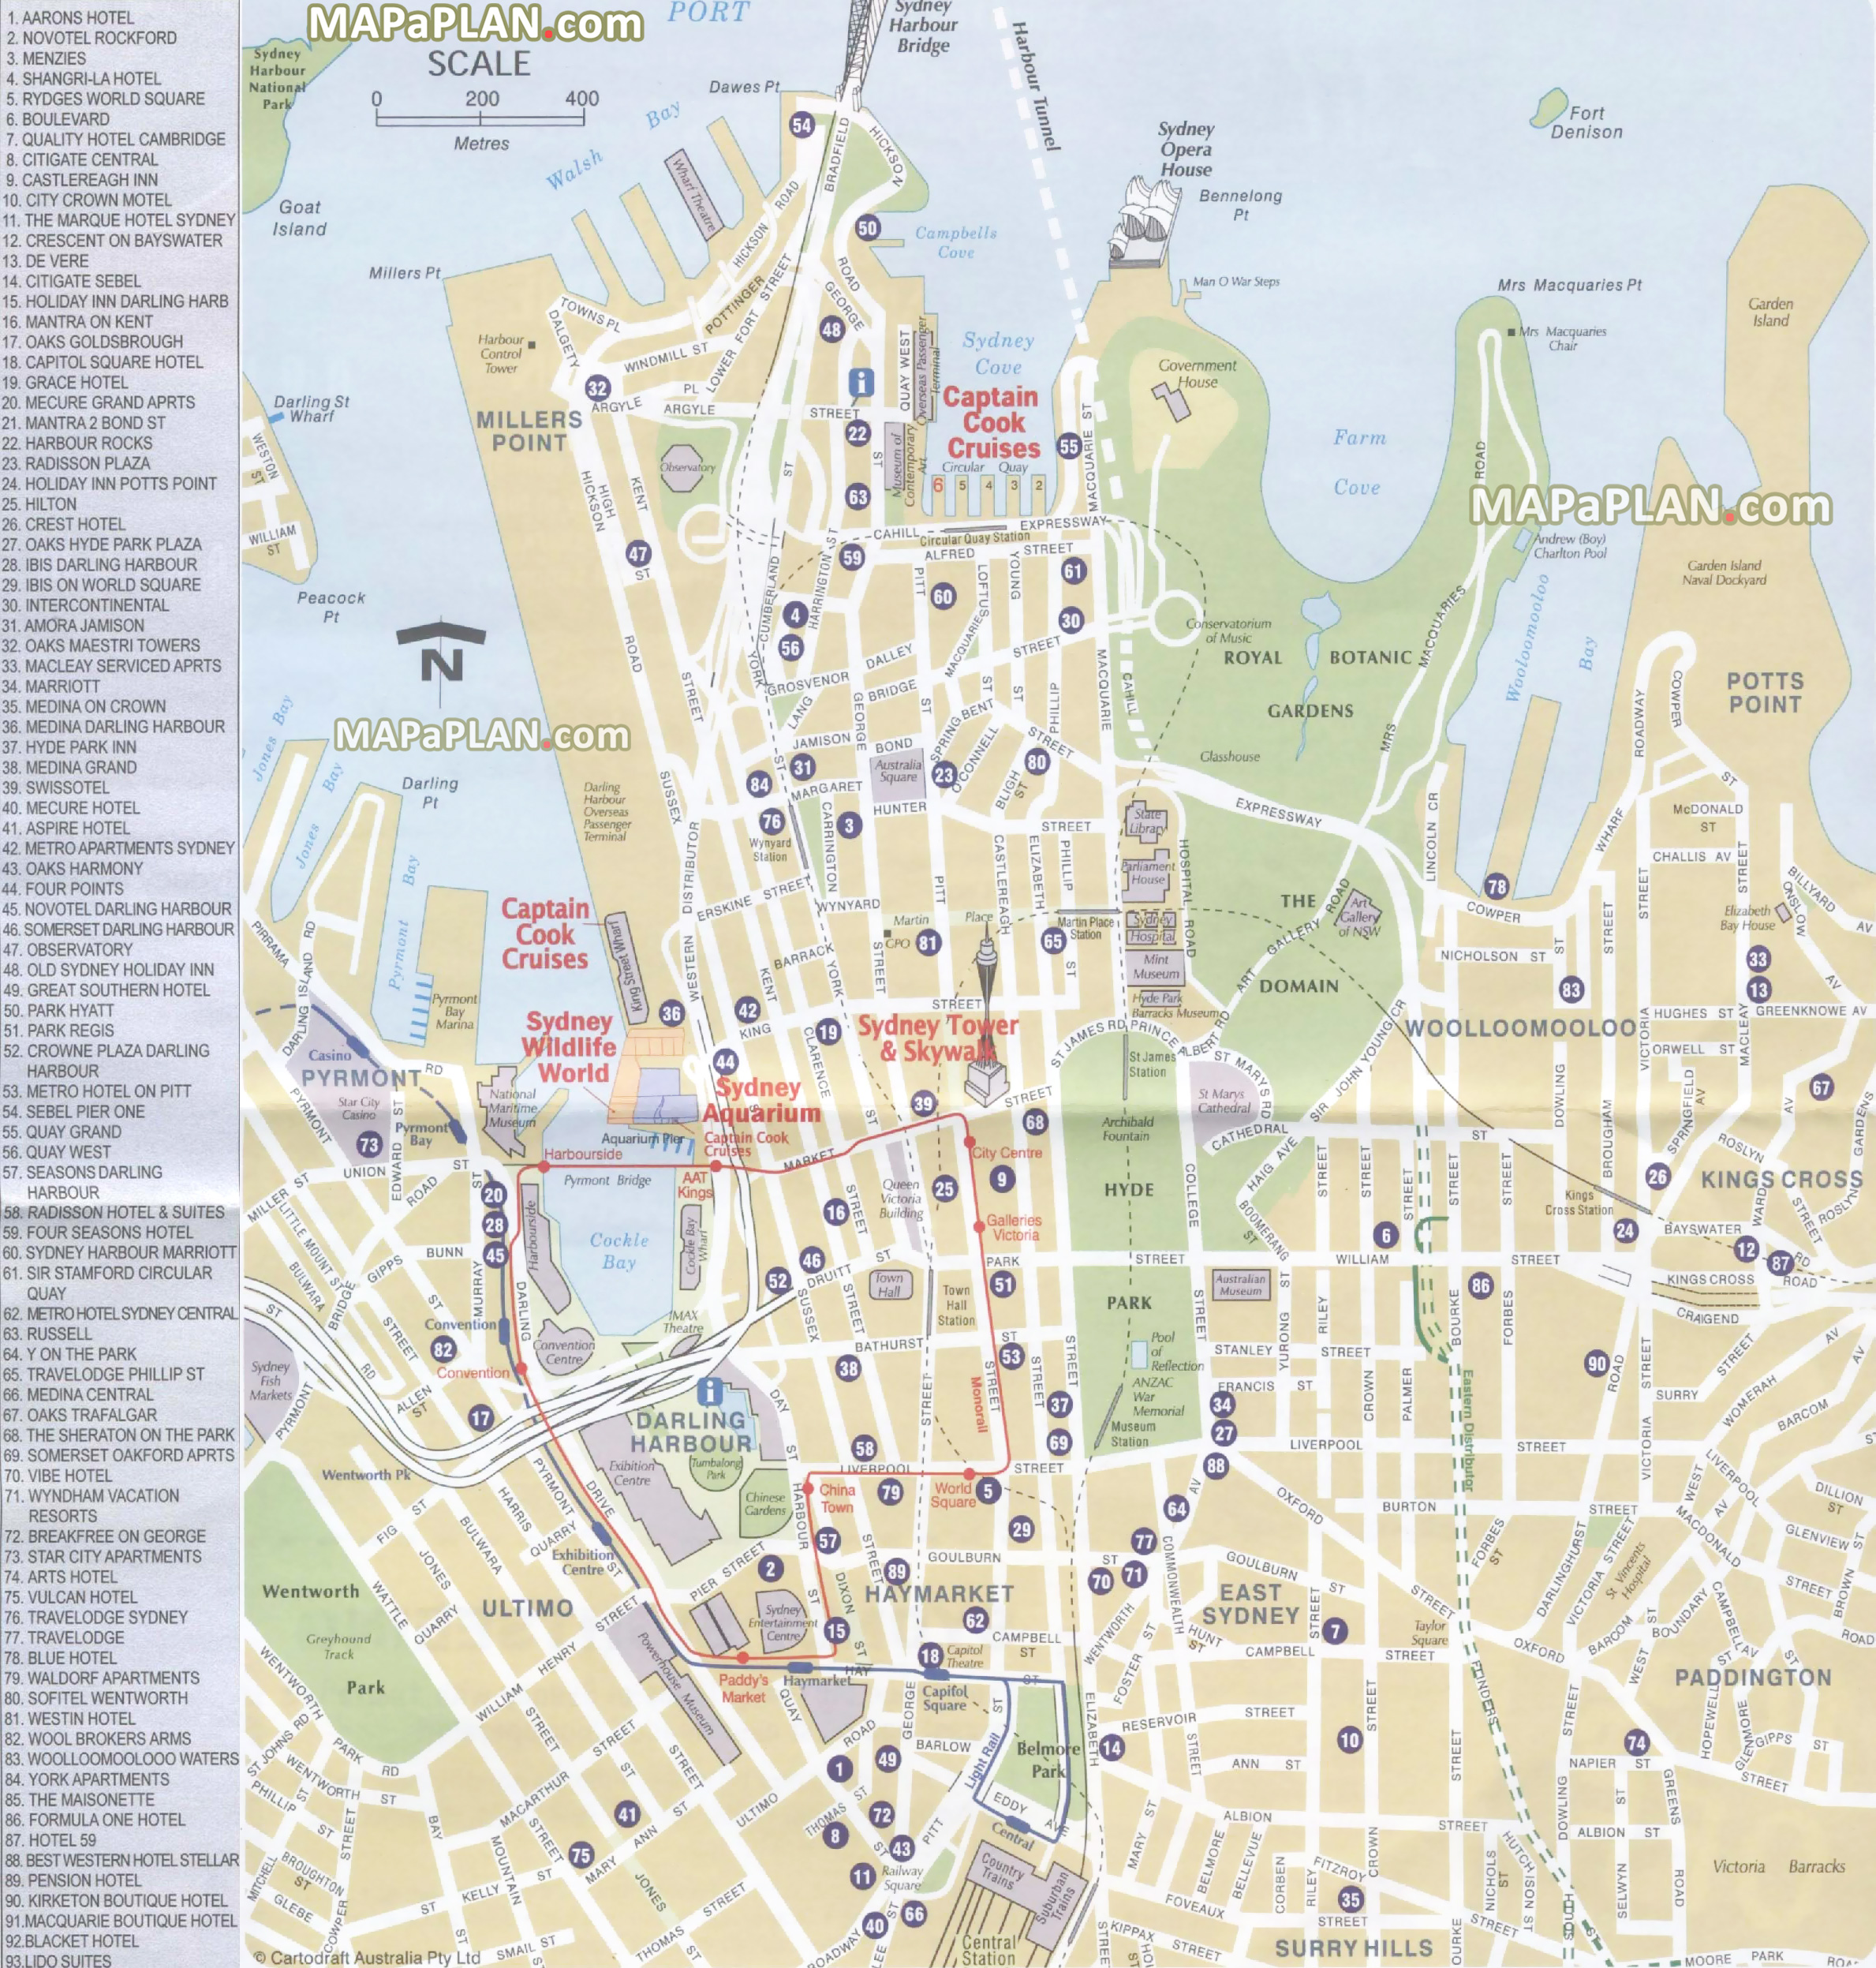 a z map hotels historical buildings must do sights wildlife world tower eye skywalk Sydney top tourist attractions map